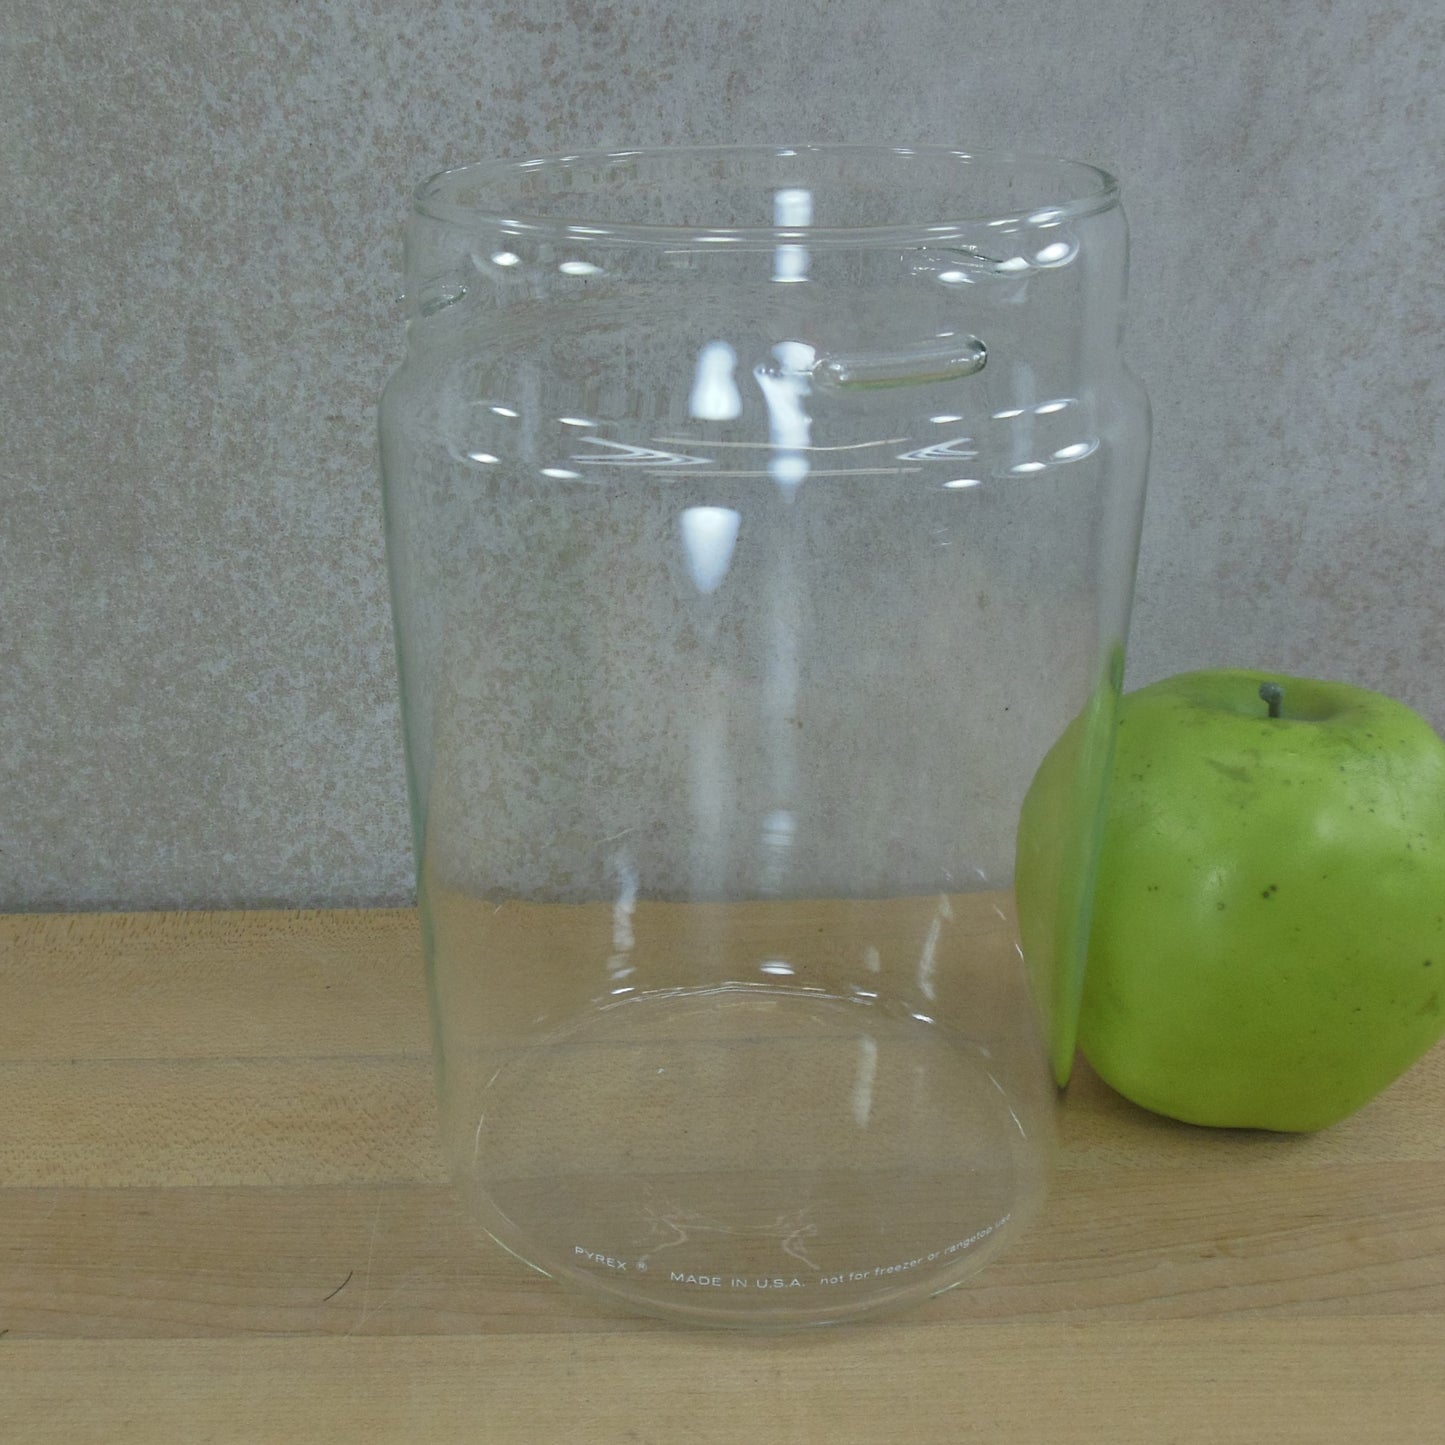 Pyrex Glass Store N See Replacement Canister 4-3/8" x 7" - No Lid